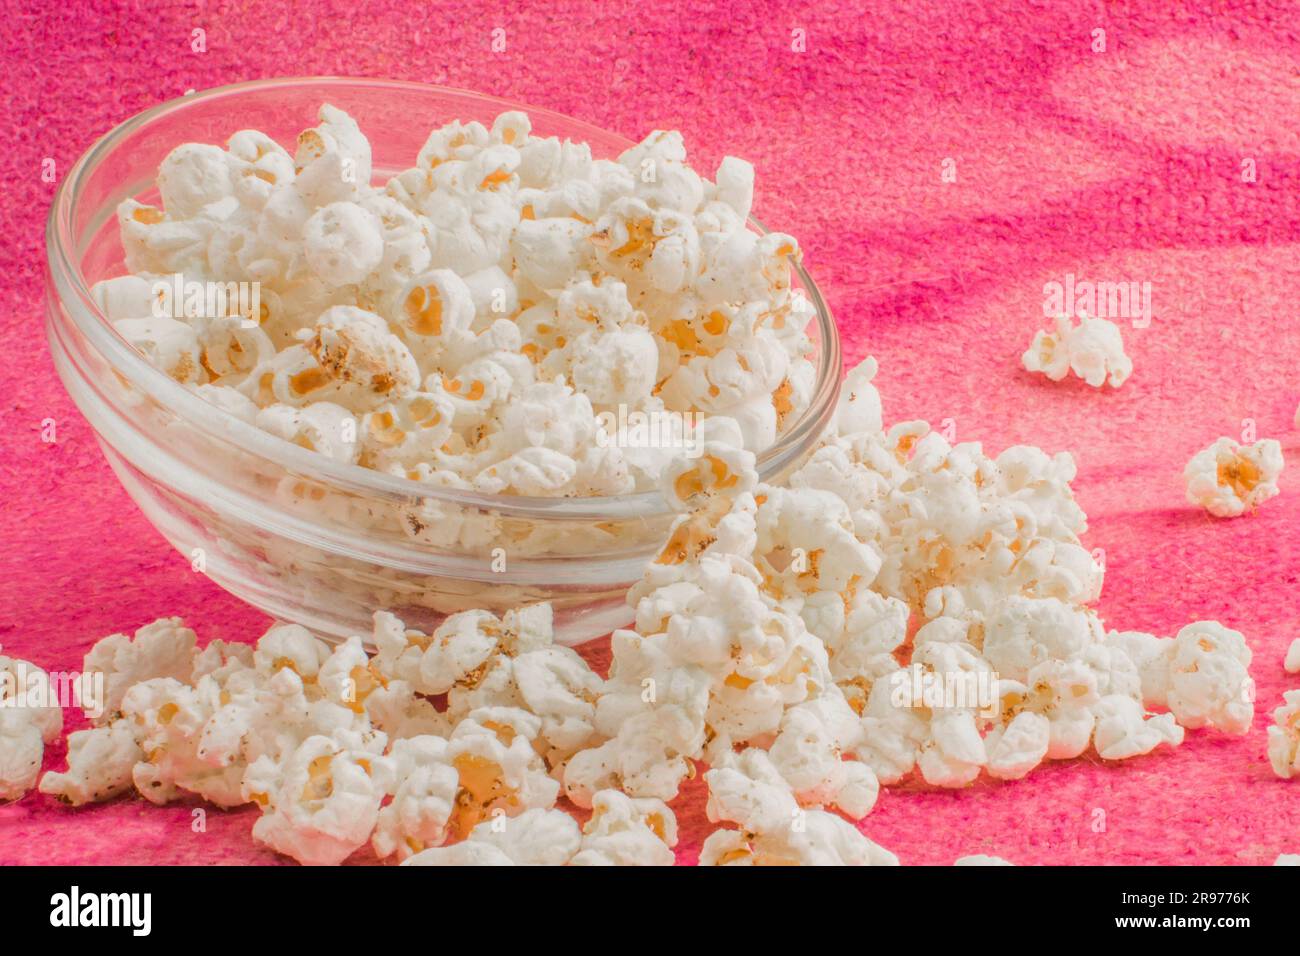 popcorn in a glass plate, on a pink uneven background Stock Photo